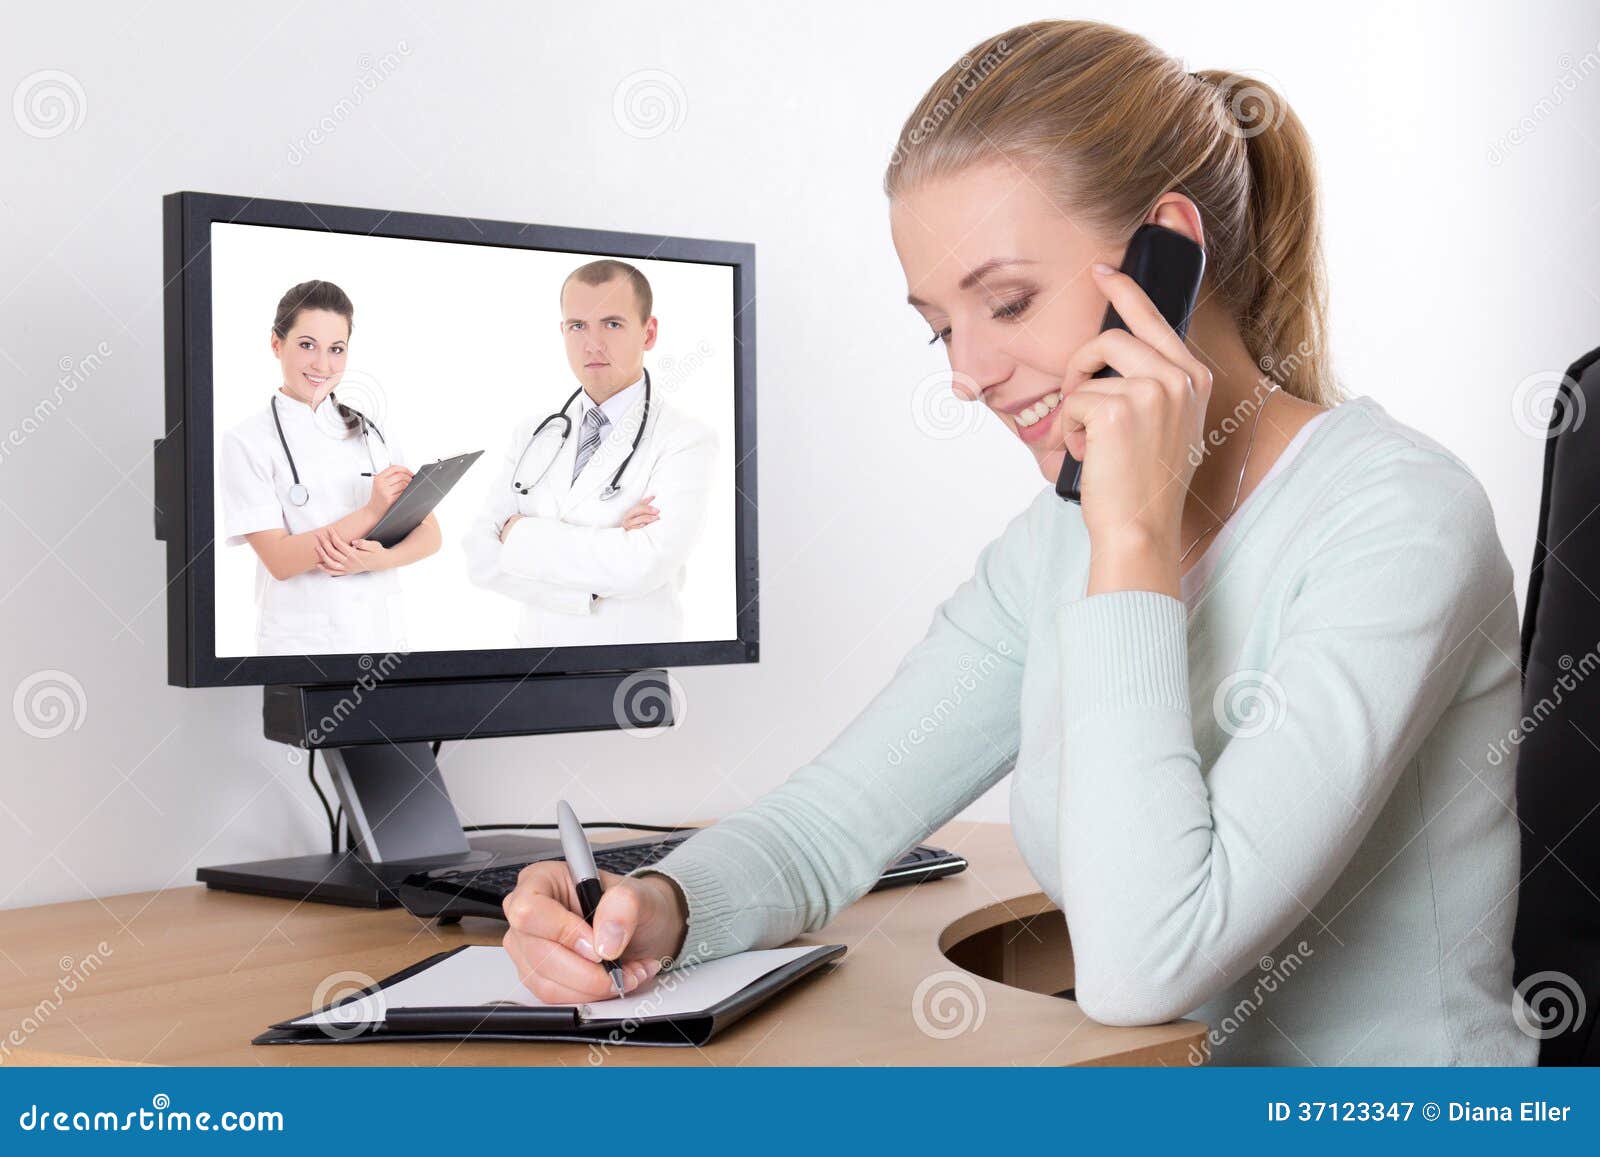 online doctor consultation for ativan withdrawal duration